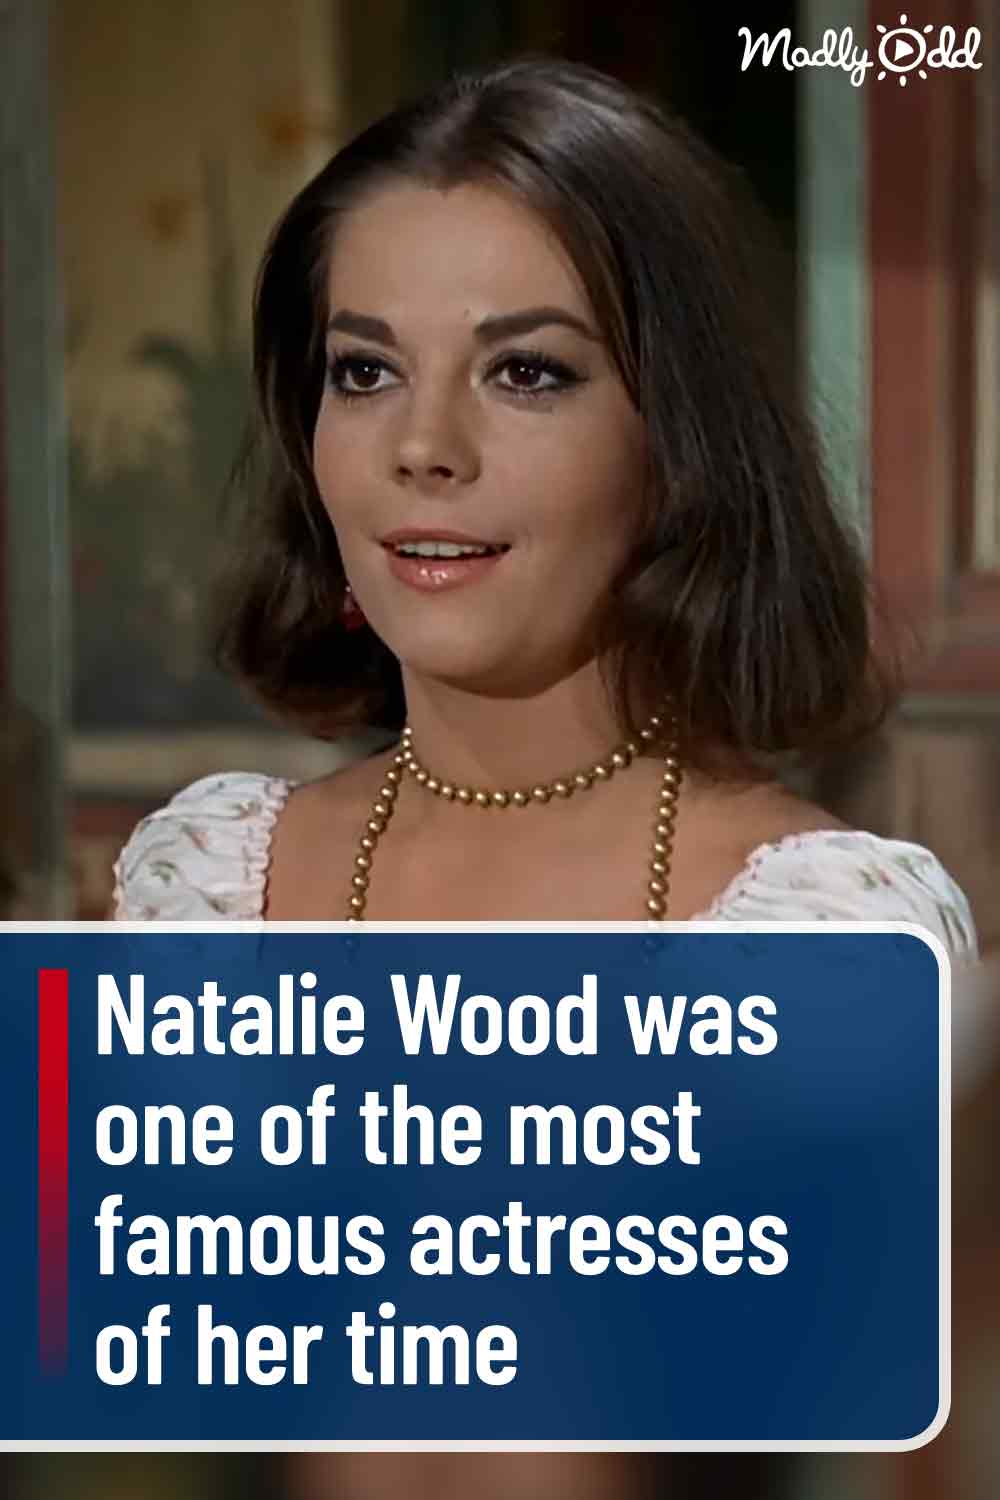 Natalie Wood was one of the most famous actresses of her time